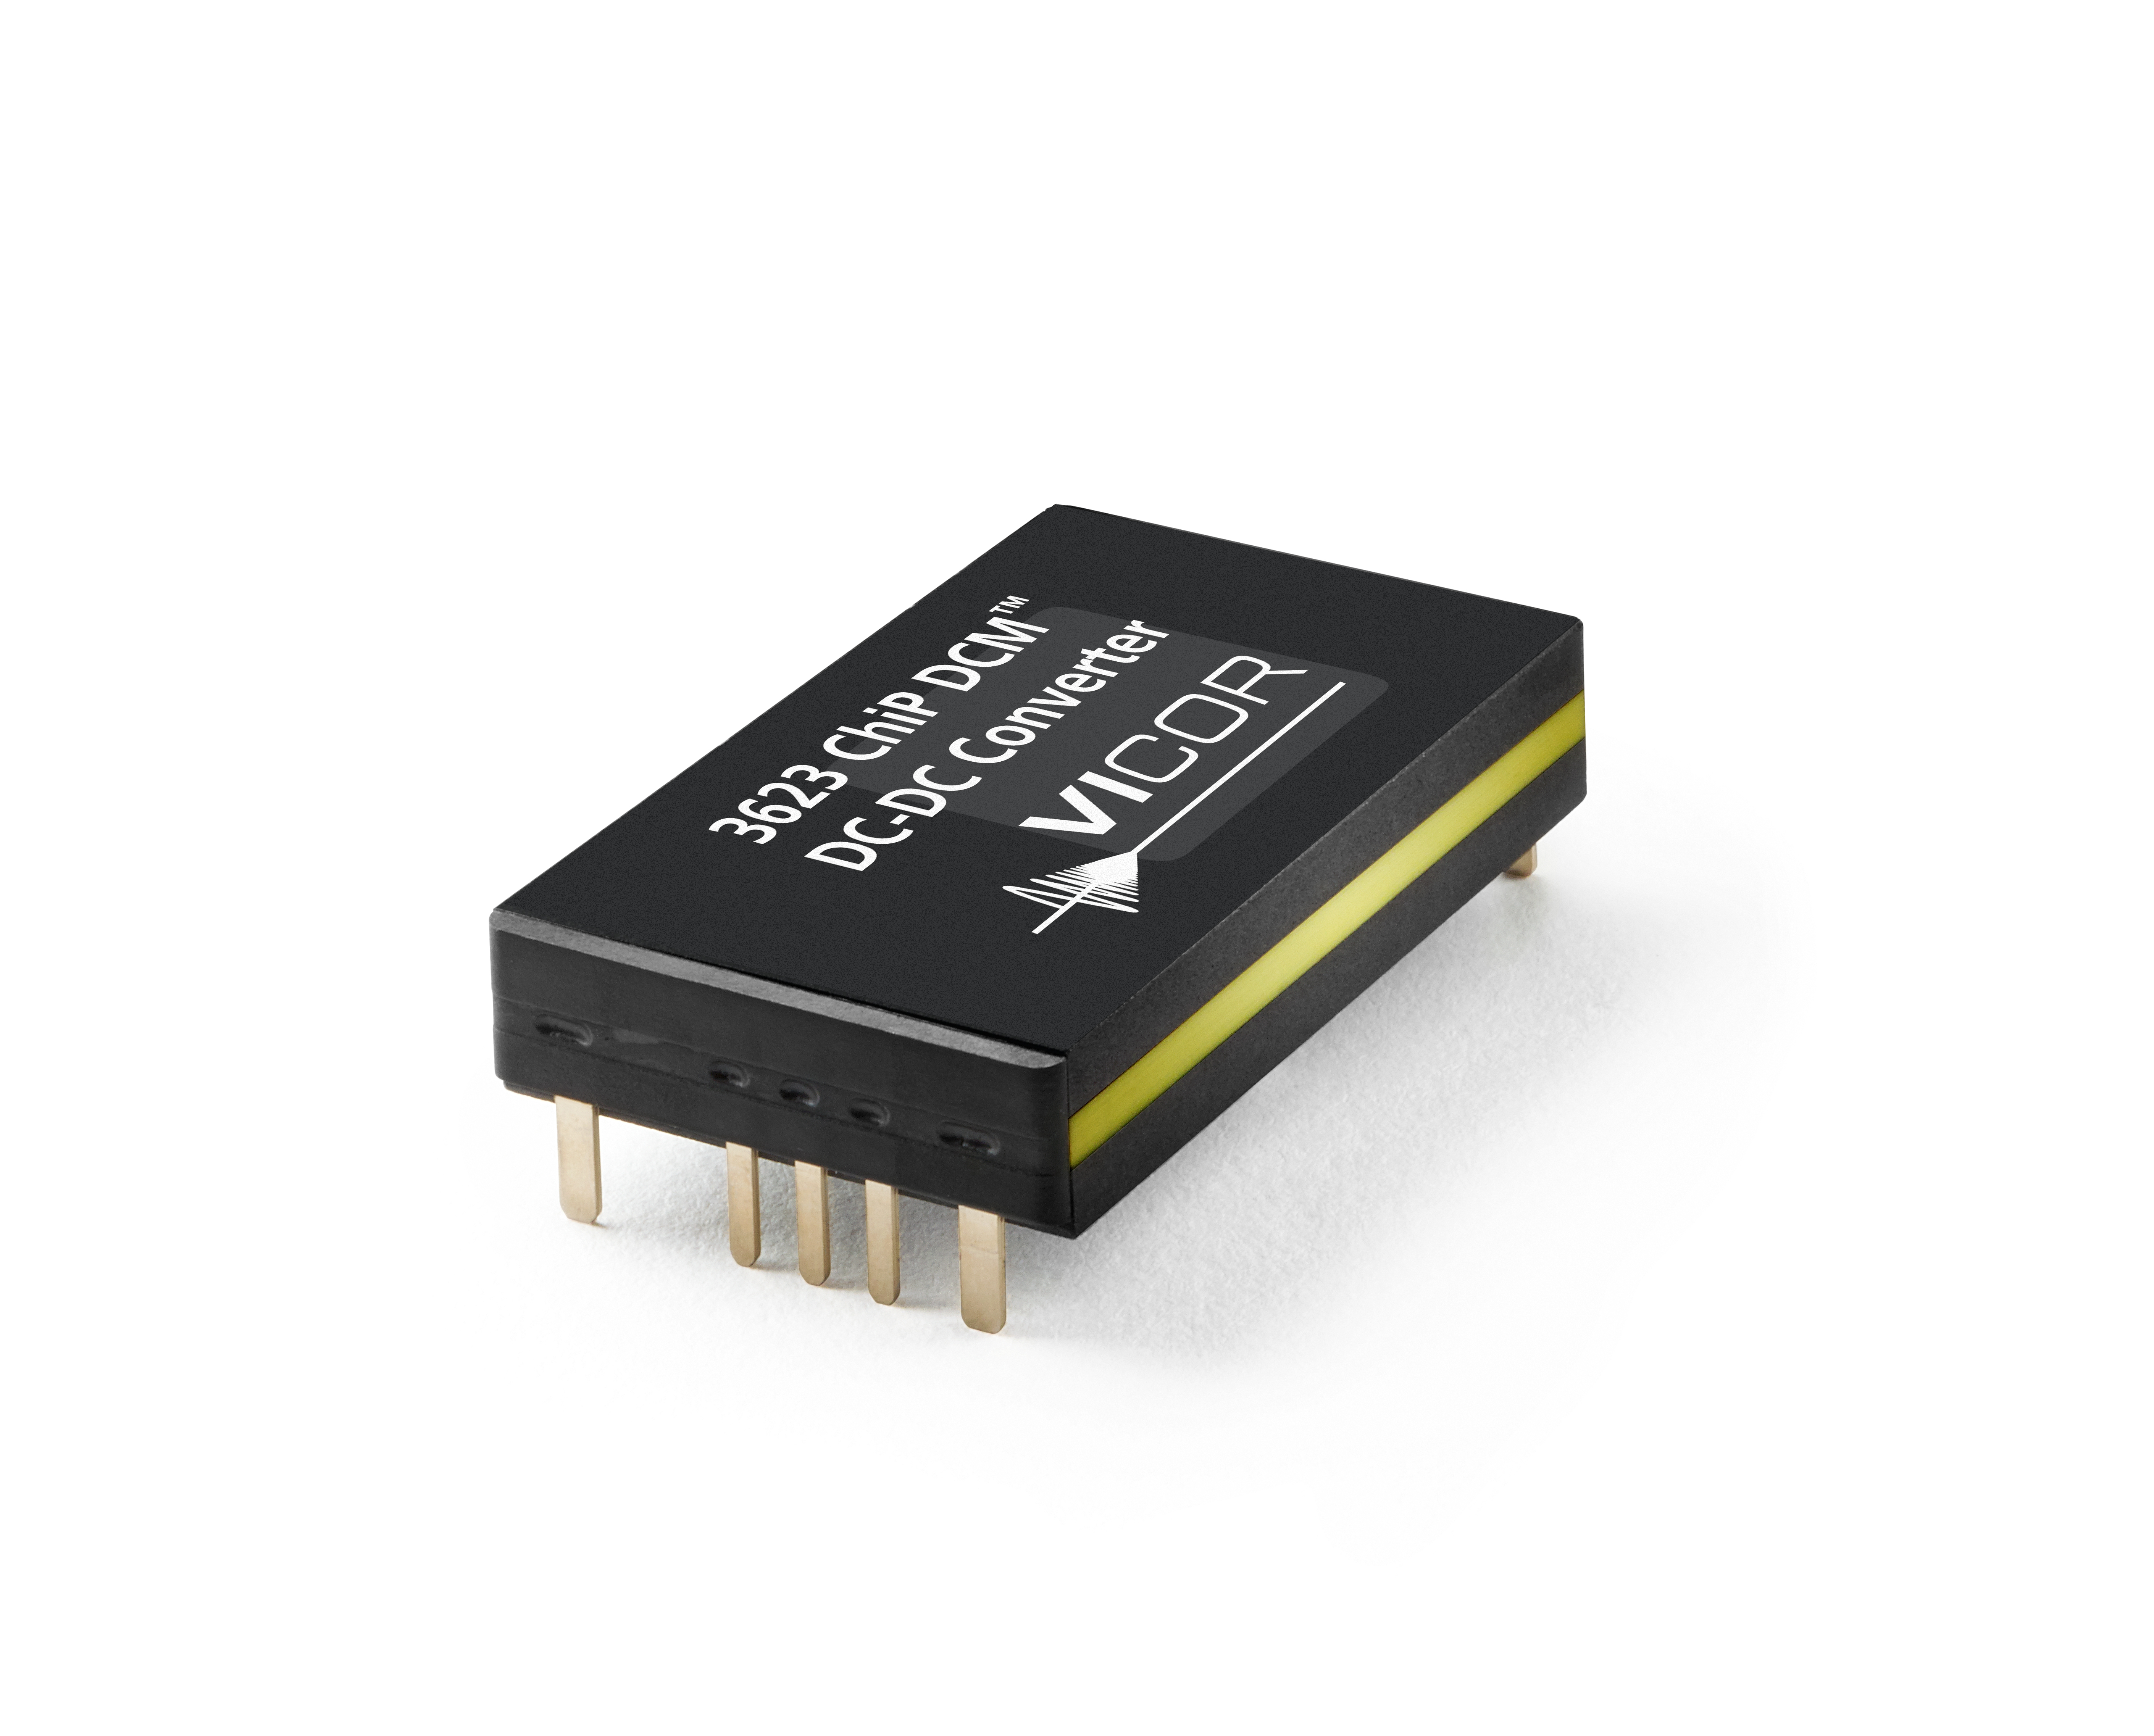 Vicor Introduces Four New DC-DC Converter ChiP Modules